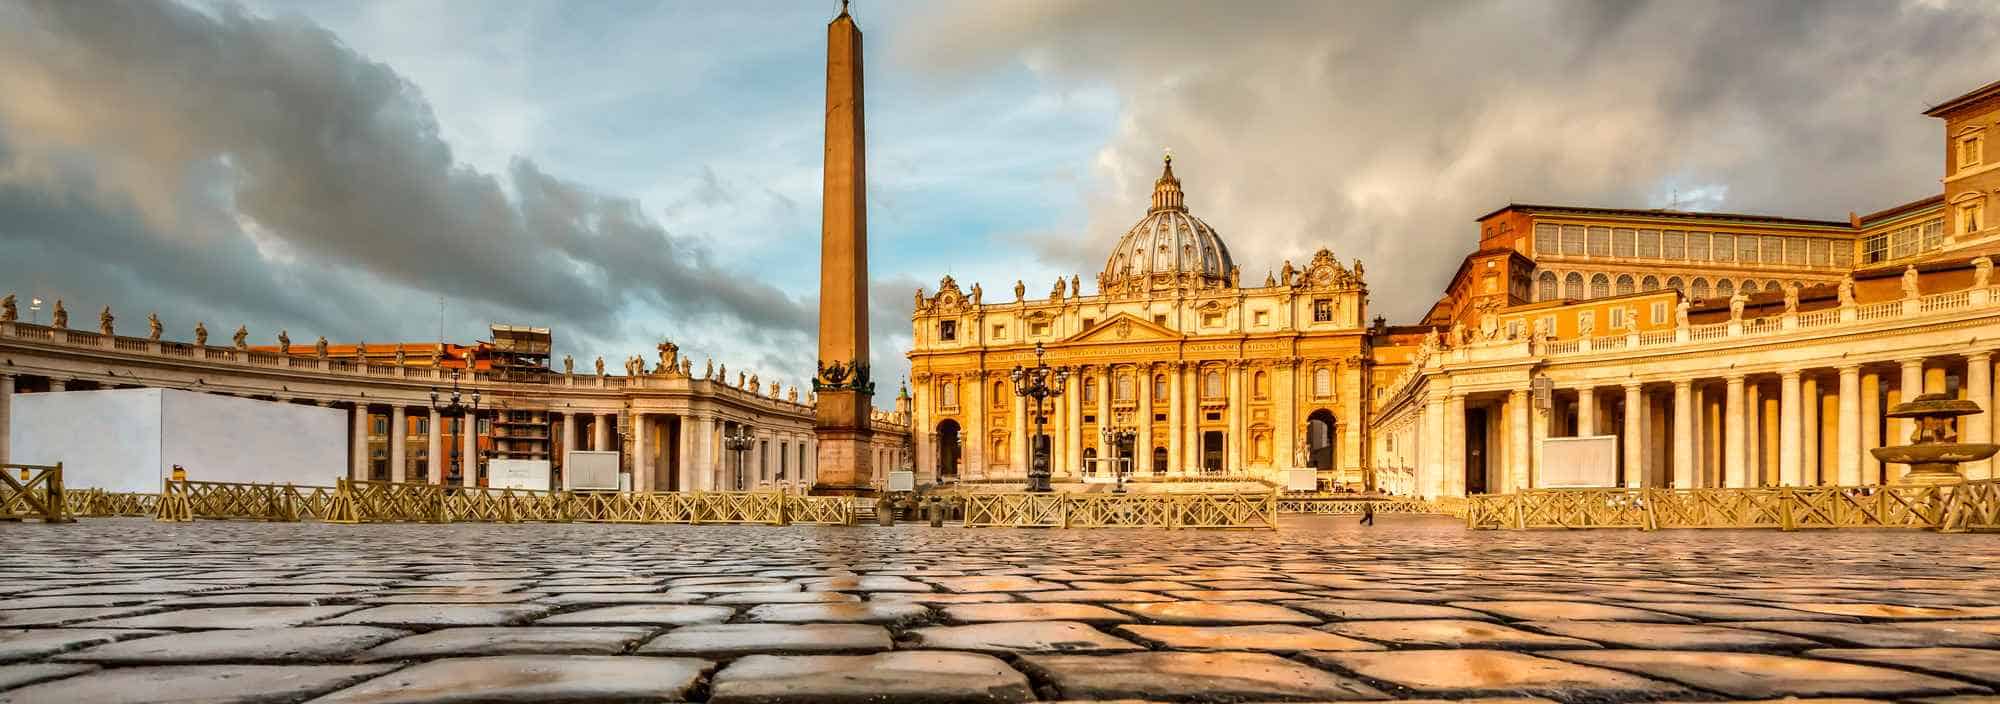 Vatican Museums guided tours